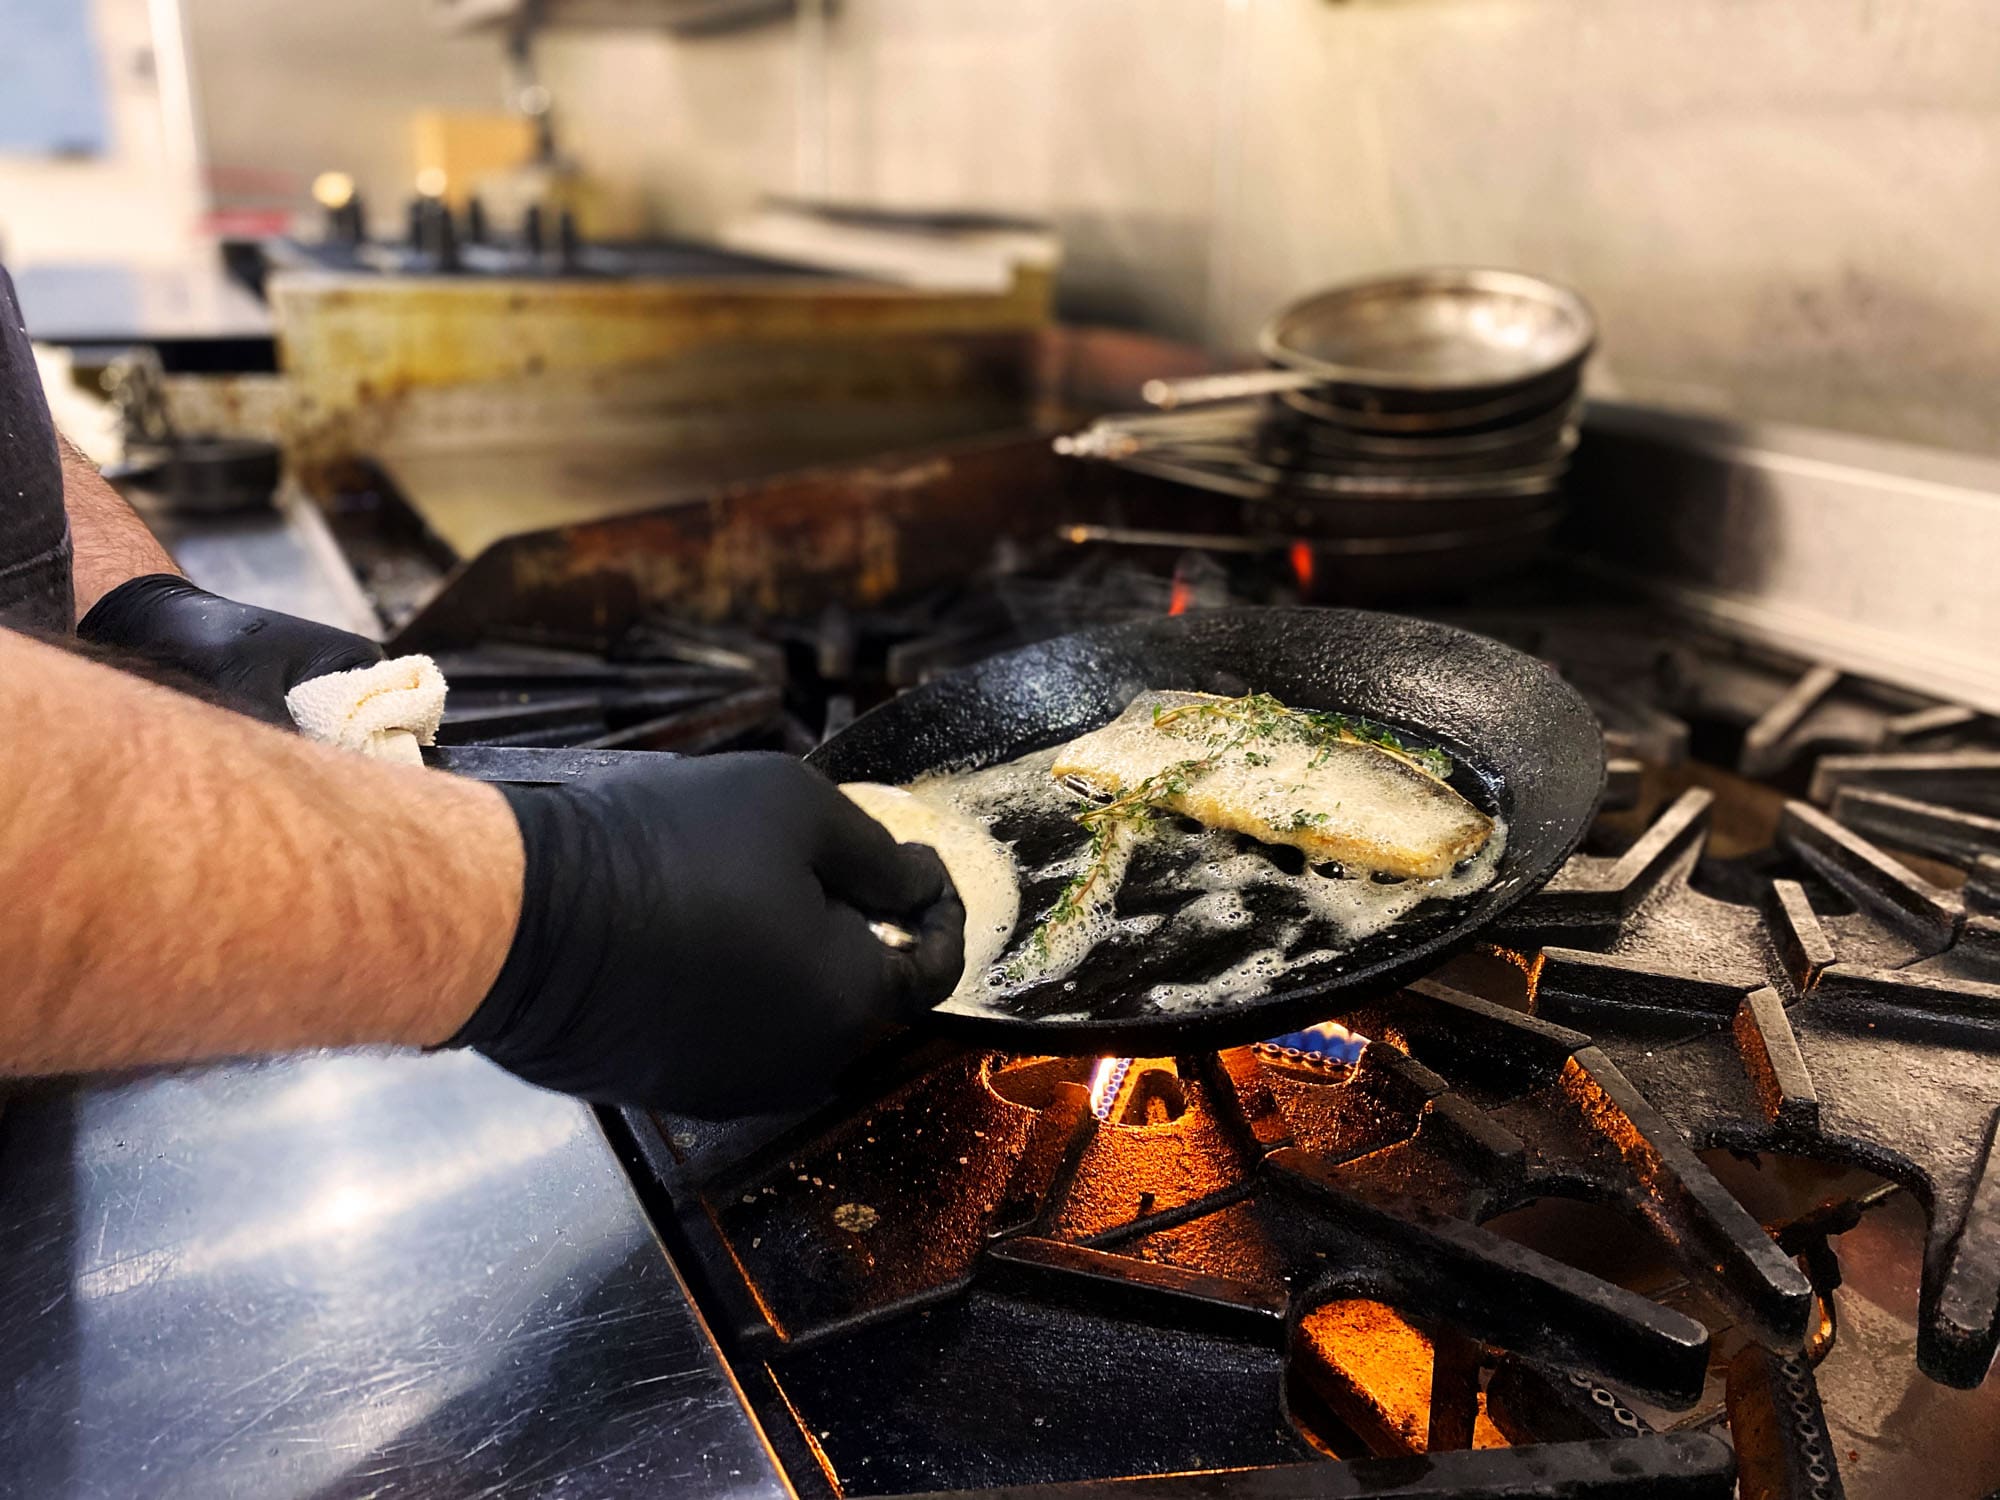 Chef Patrick Dunlop searing trout in a cast iron skillet over a flame.